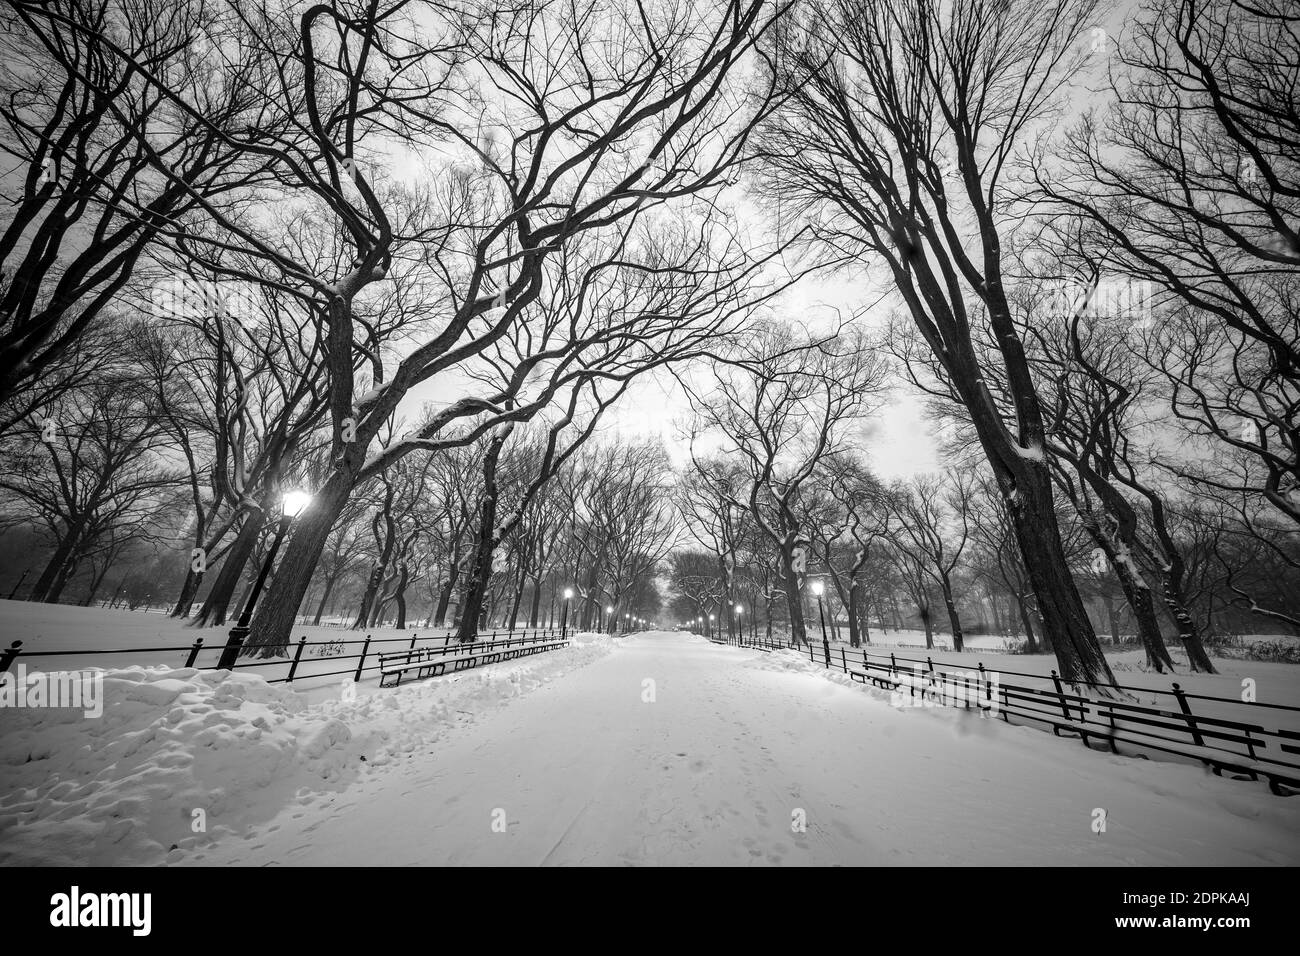 Trees and the Mall are covered in snow in Central Park, New York City Stock Photo